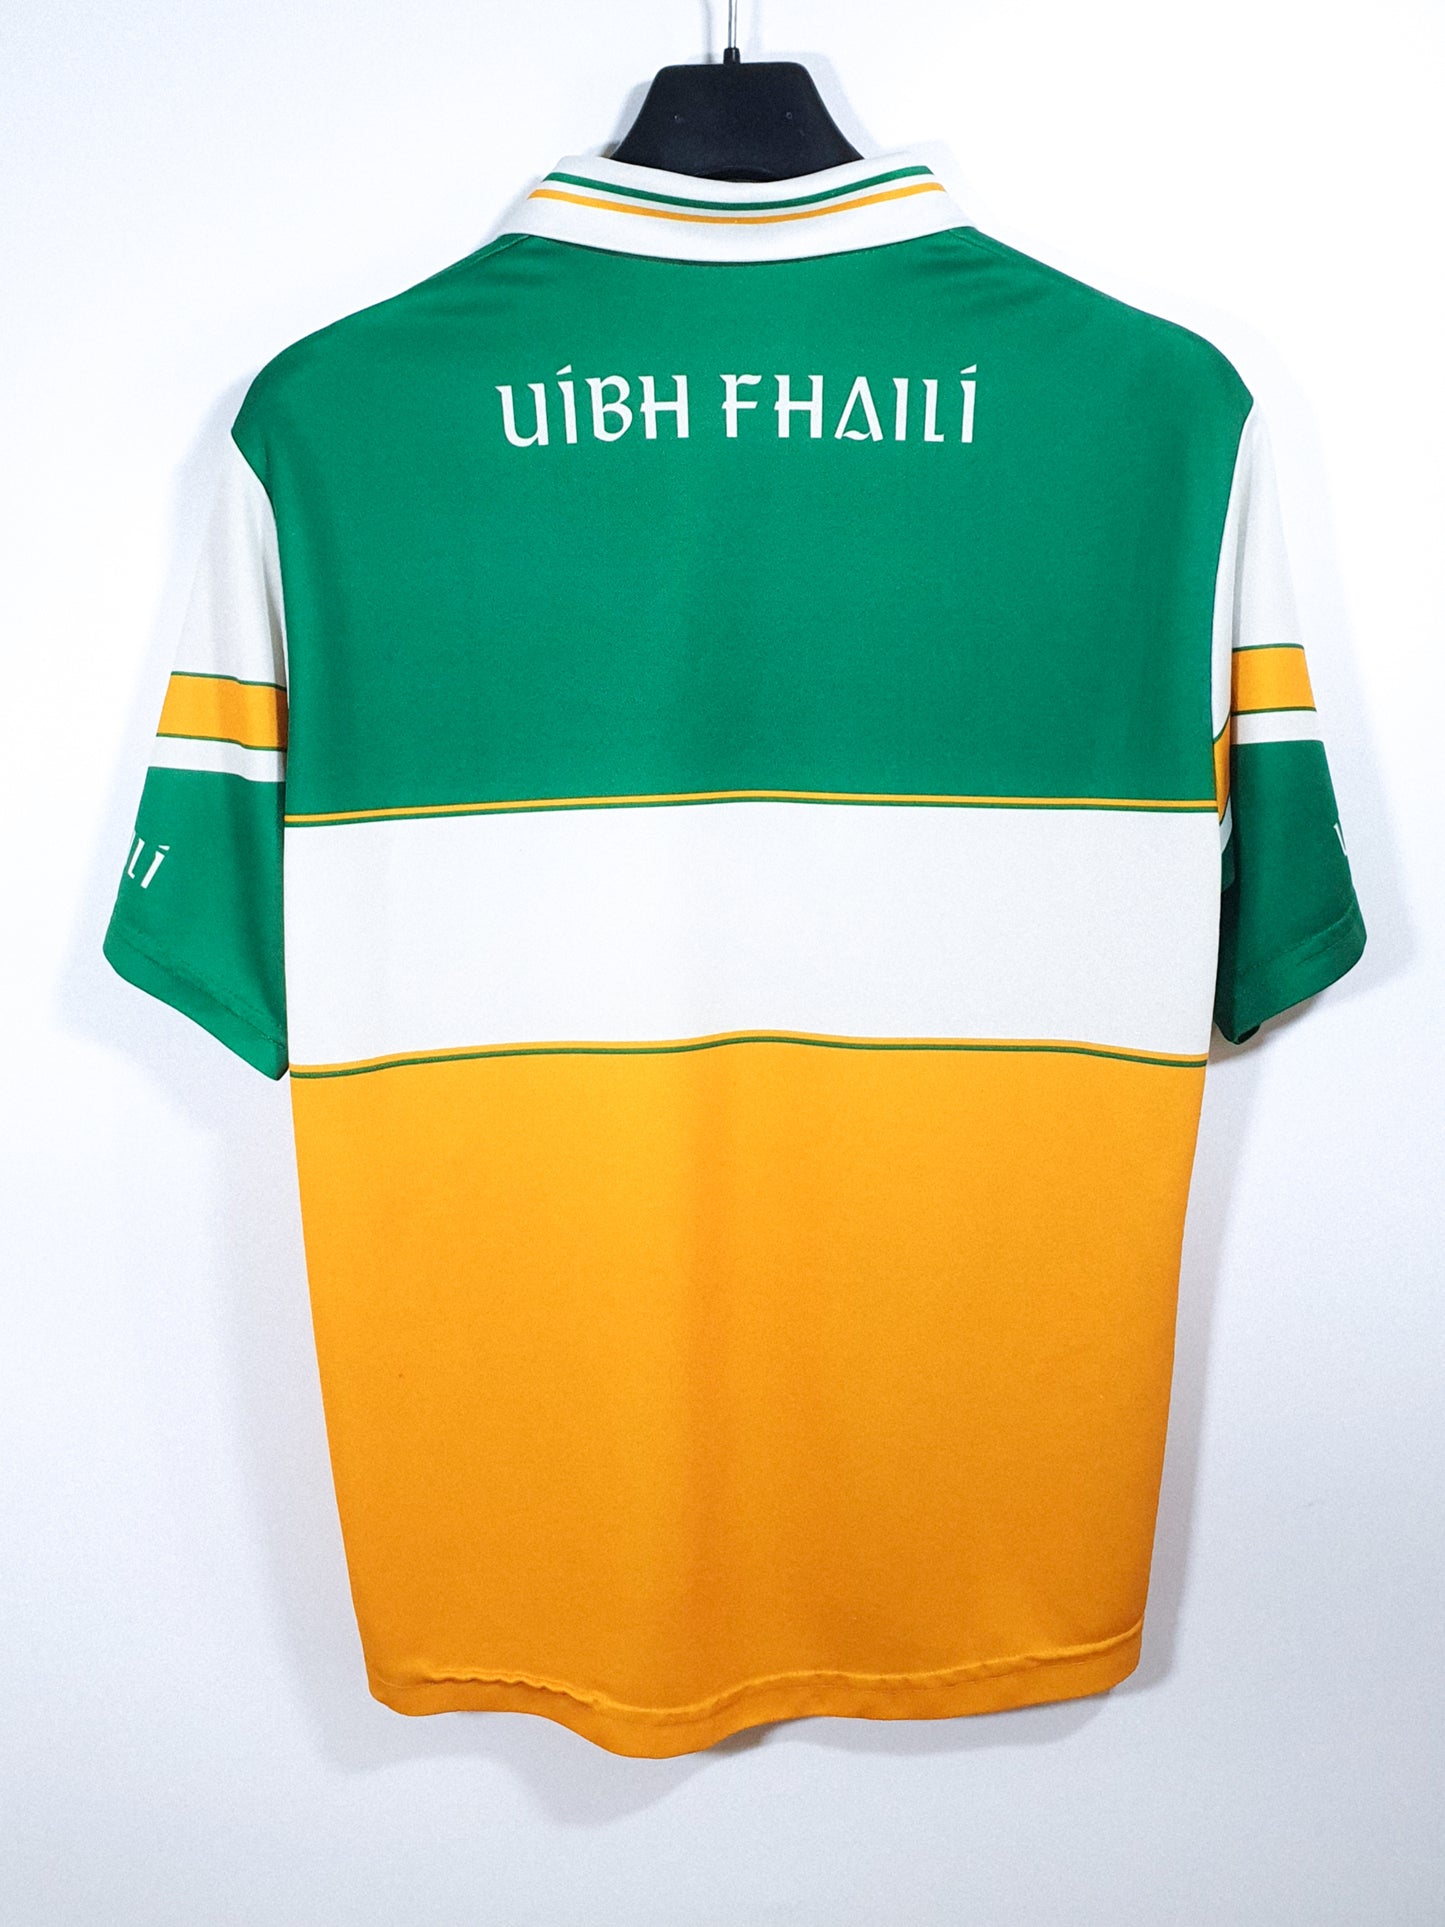 Offaly 2005 (Youths)